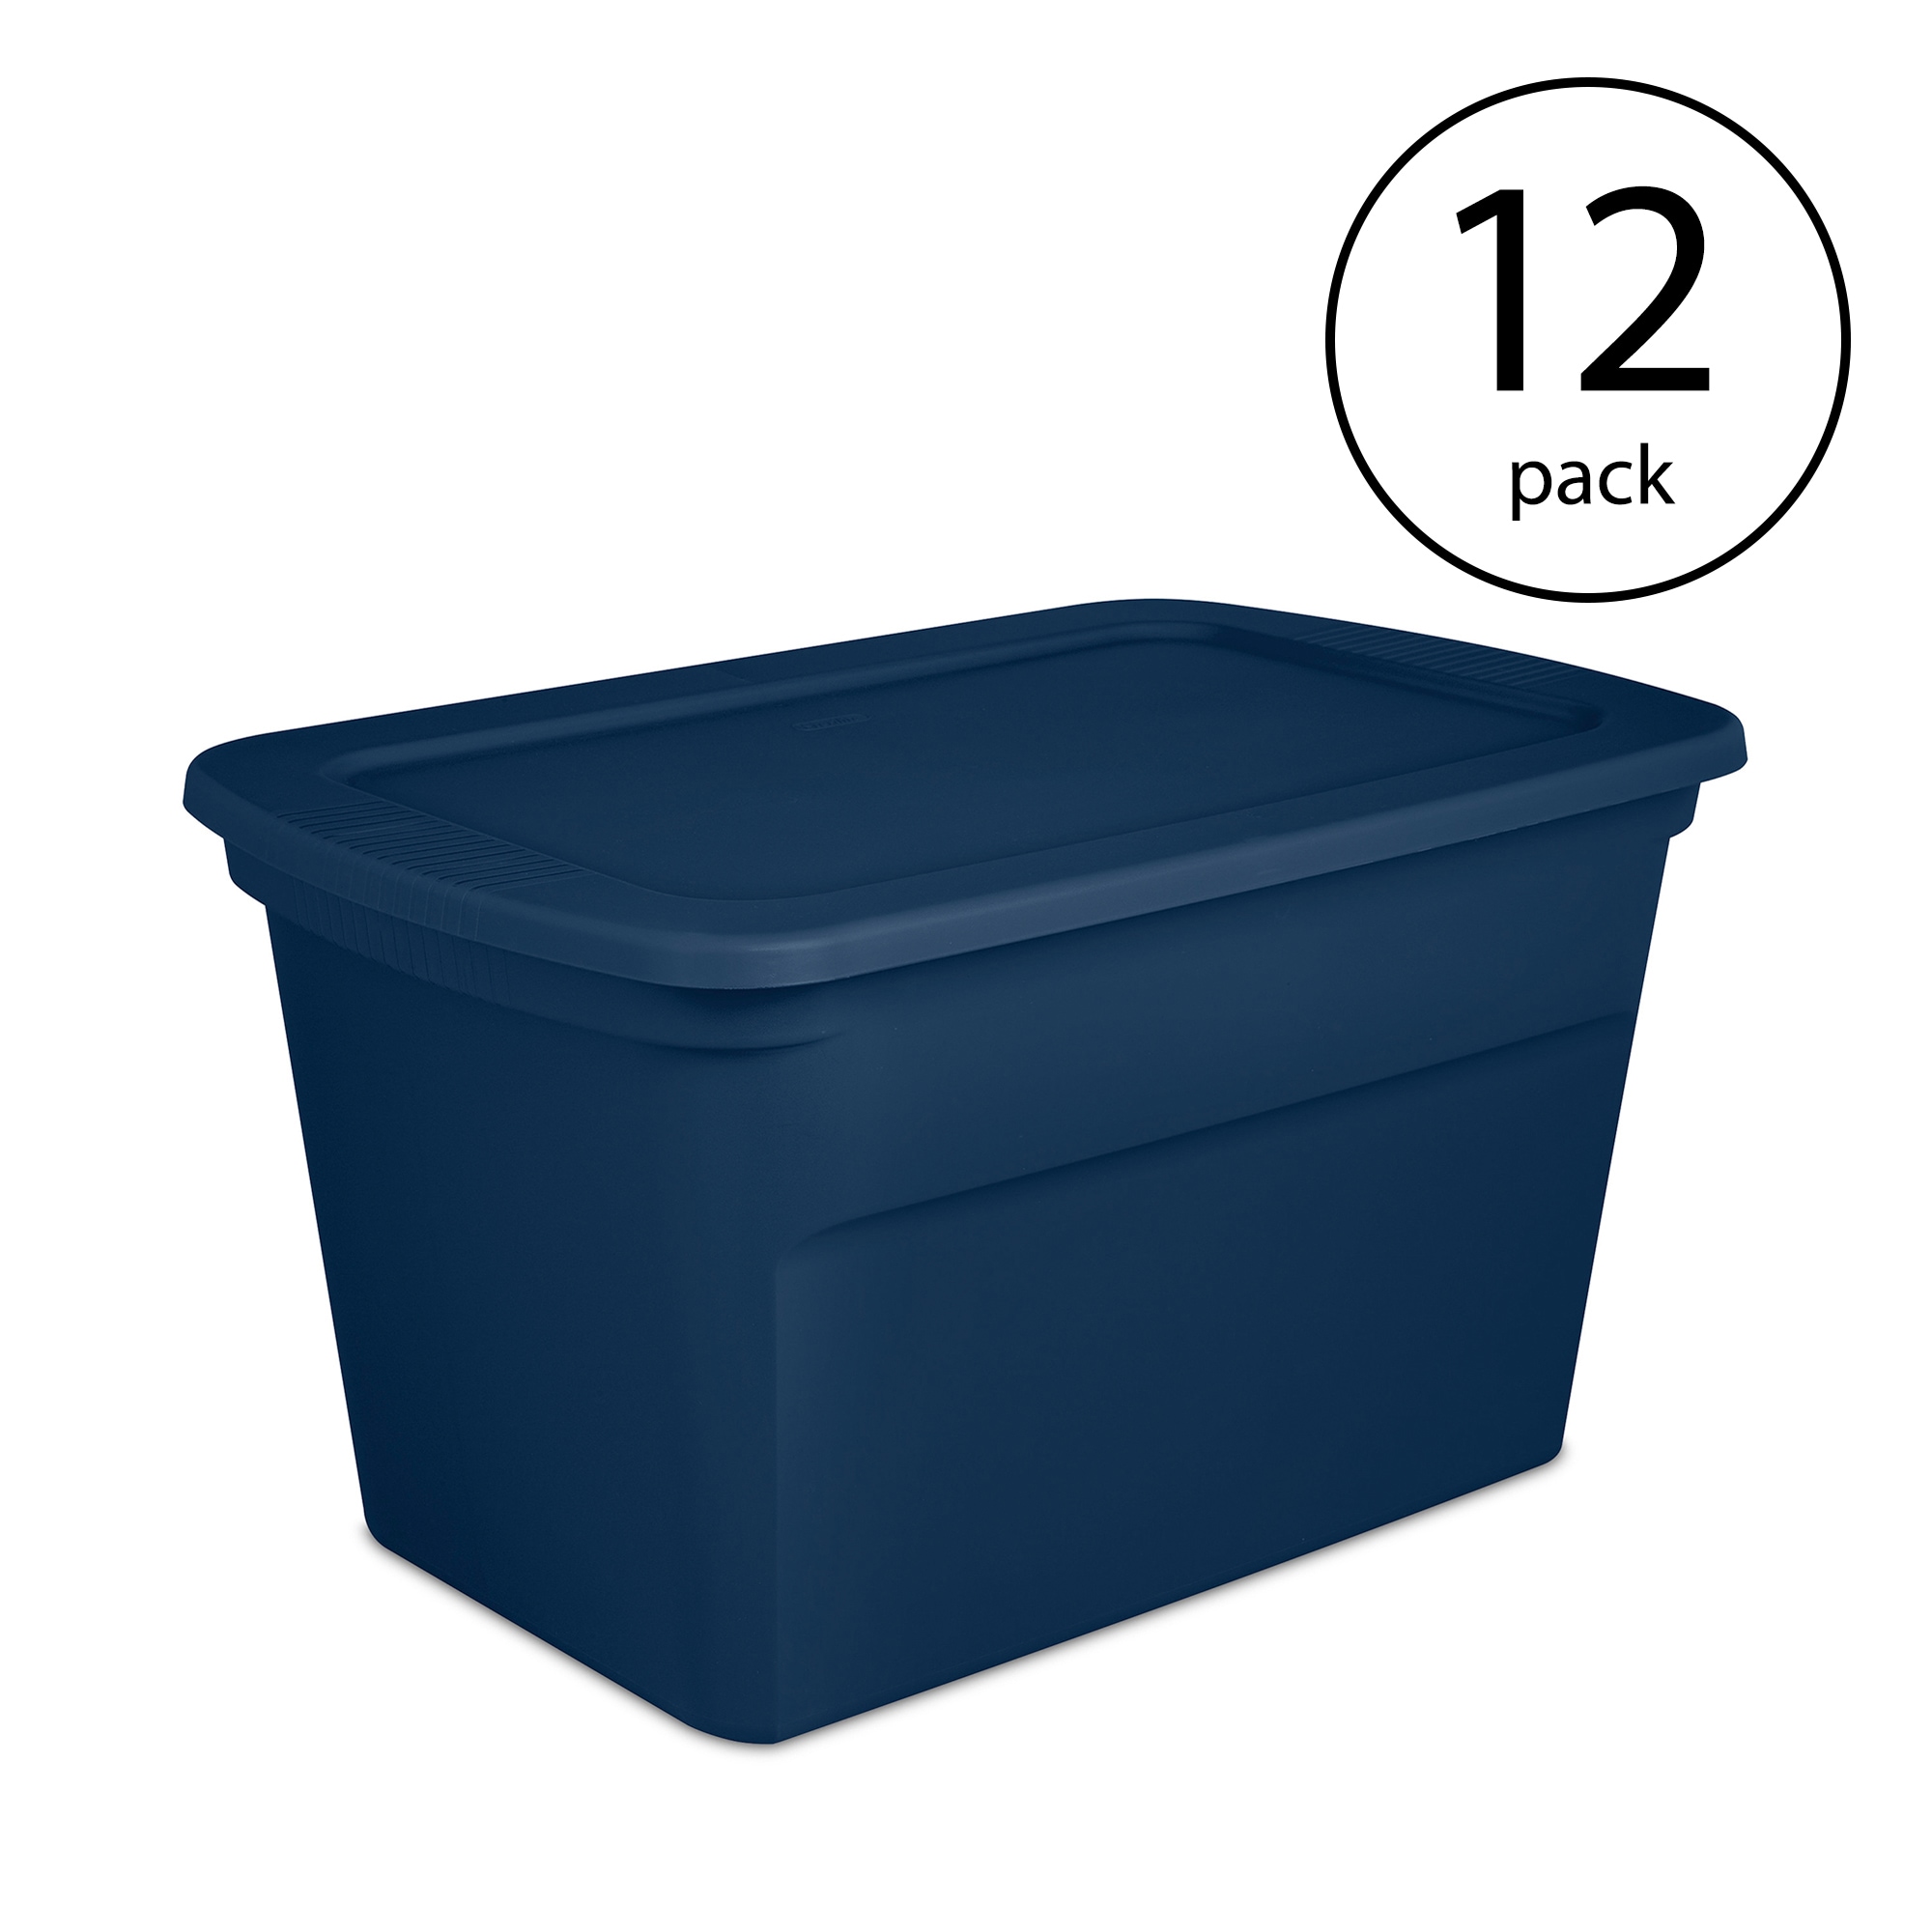 Project Source Medium 18-Gallons (72-Quart) Gray Heavy Duty Tote with  Standard Snap Lid in the Plastic Storage Containers department at